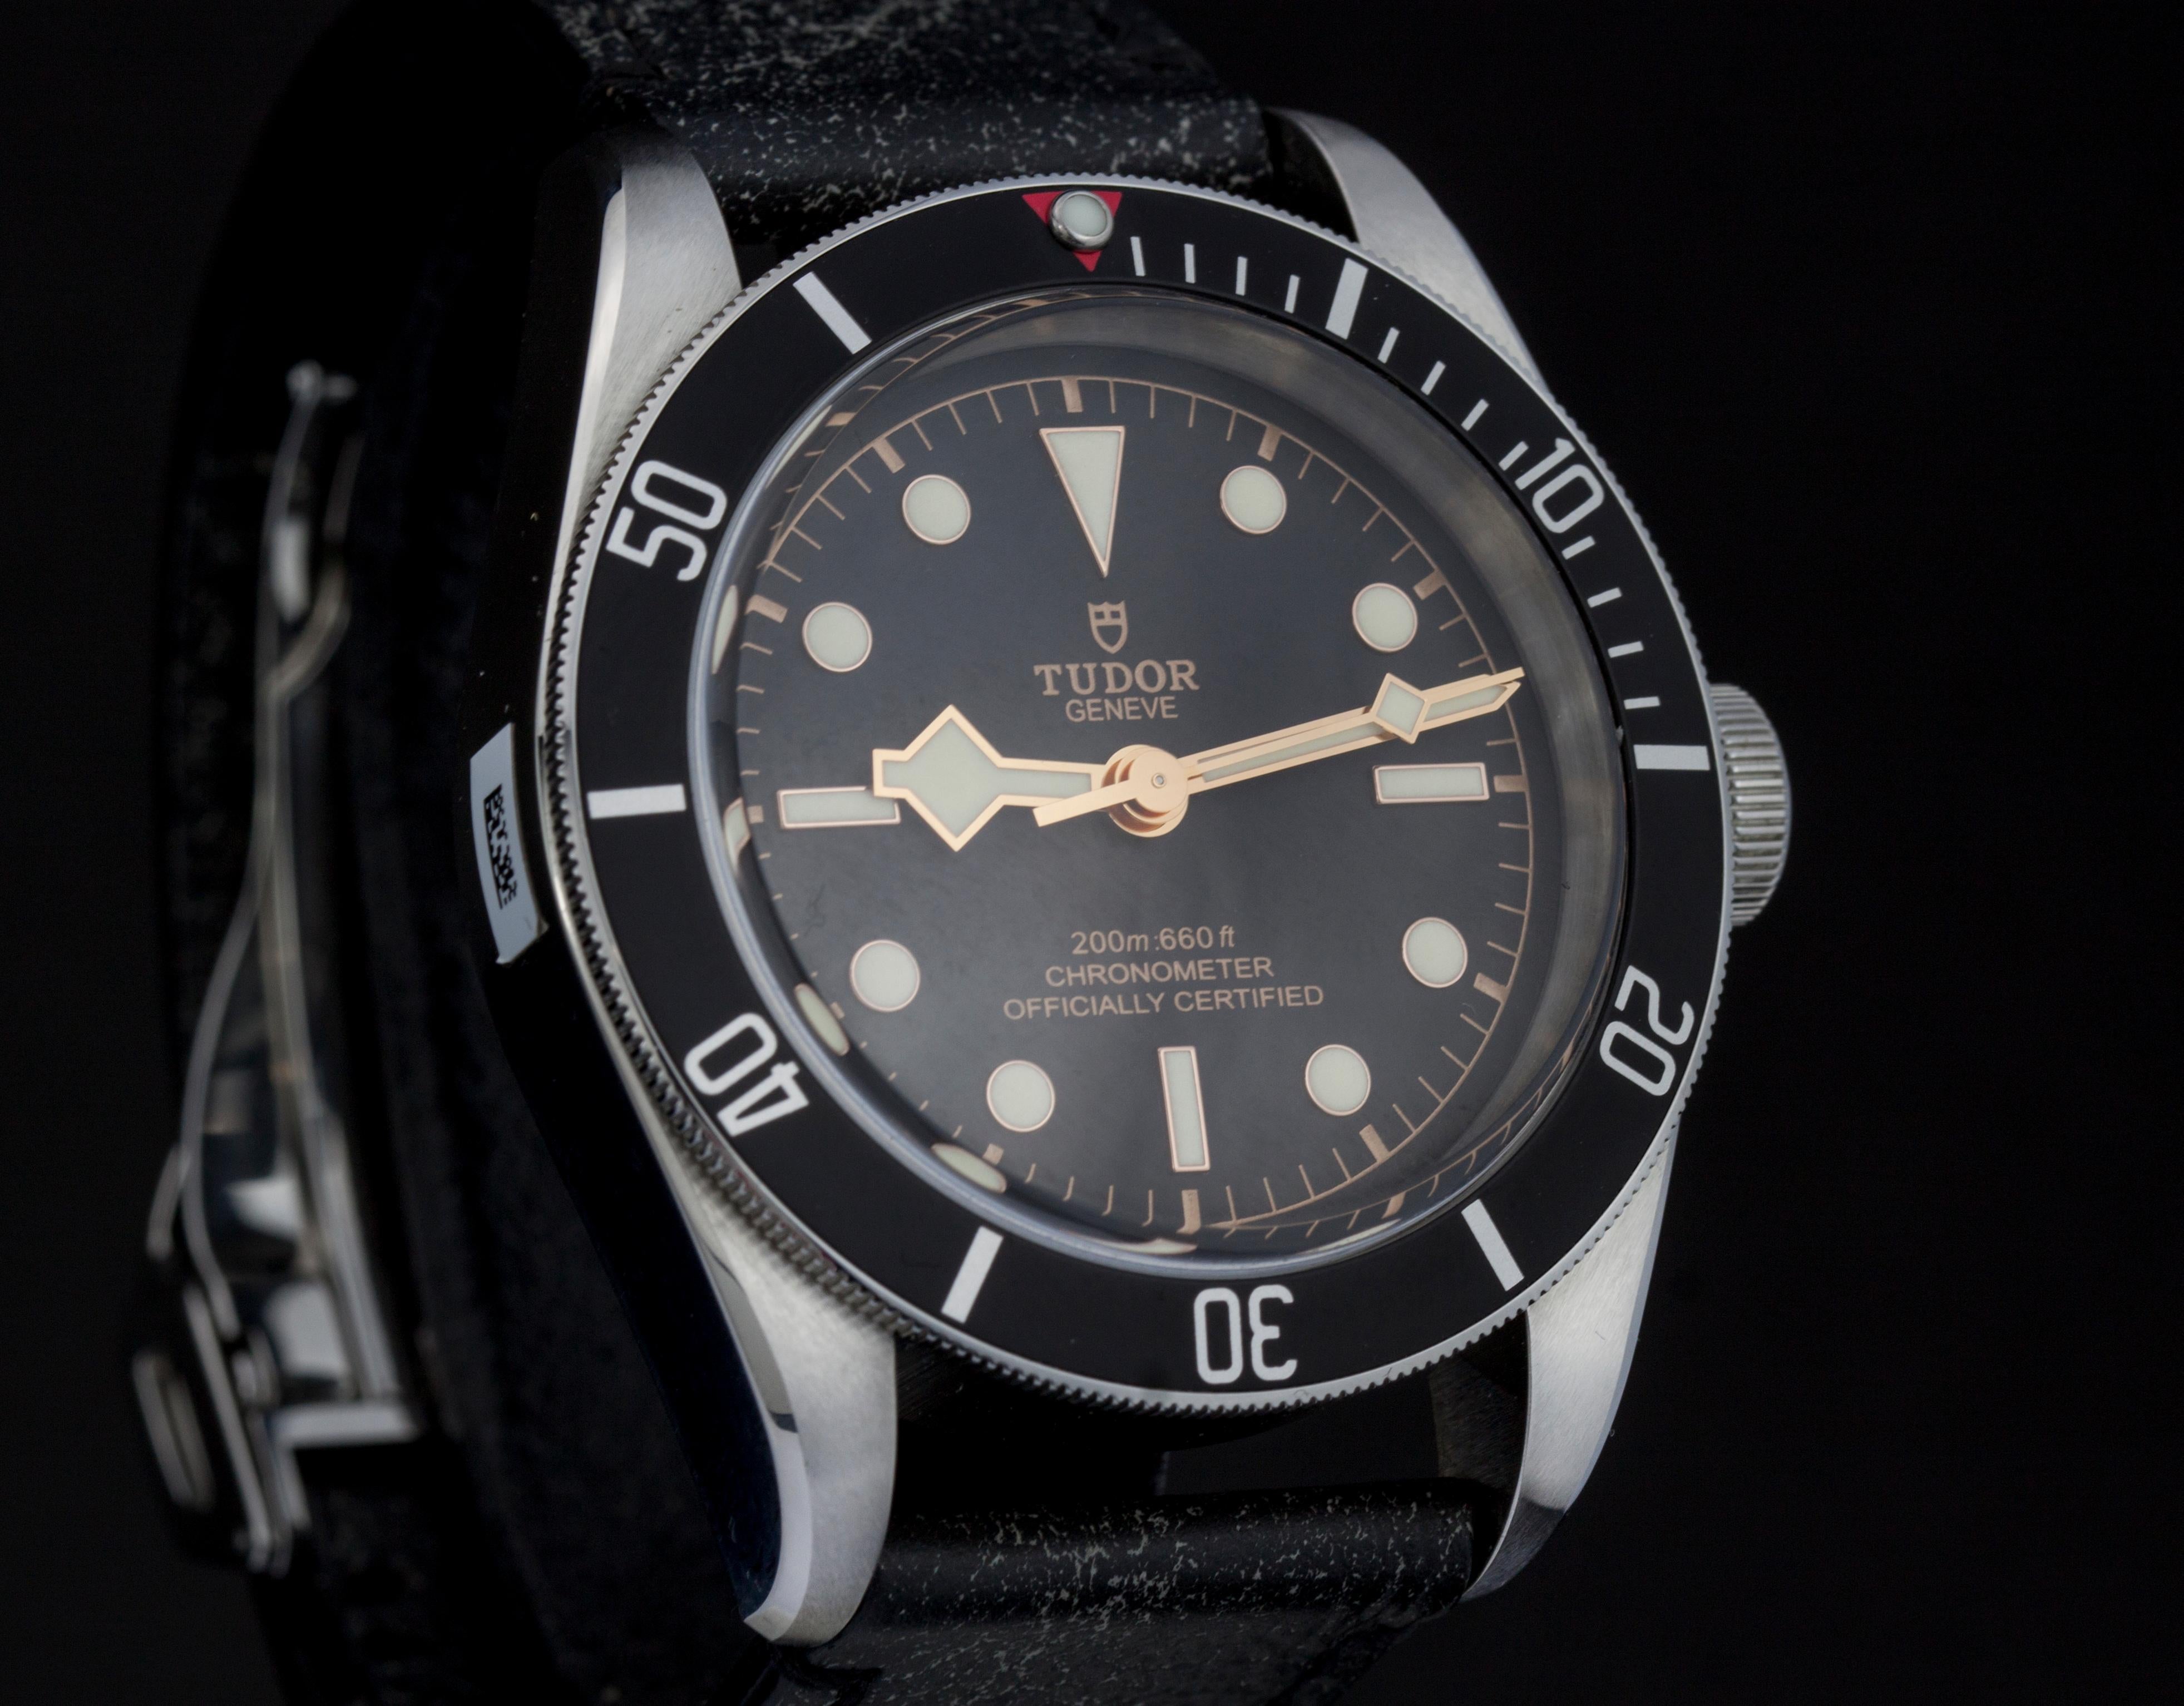 Tudor Heritage Black Bay

- With Manufacturer Serial Numbers
- Swiss Made
- Black Dial
- 70 Hour Power Reserve
- Self-winding Automatic Movement
    COSC Chronometer Certified
- Tudor Caliber MT5602
- Vibrations Per Hour: 28,800
- Jewels: 25
-